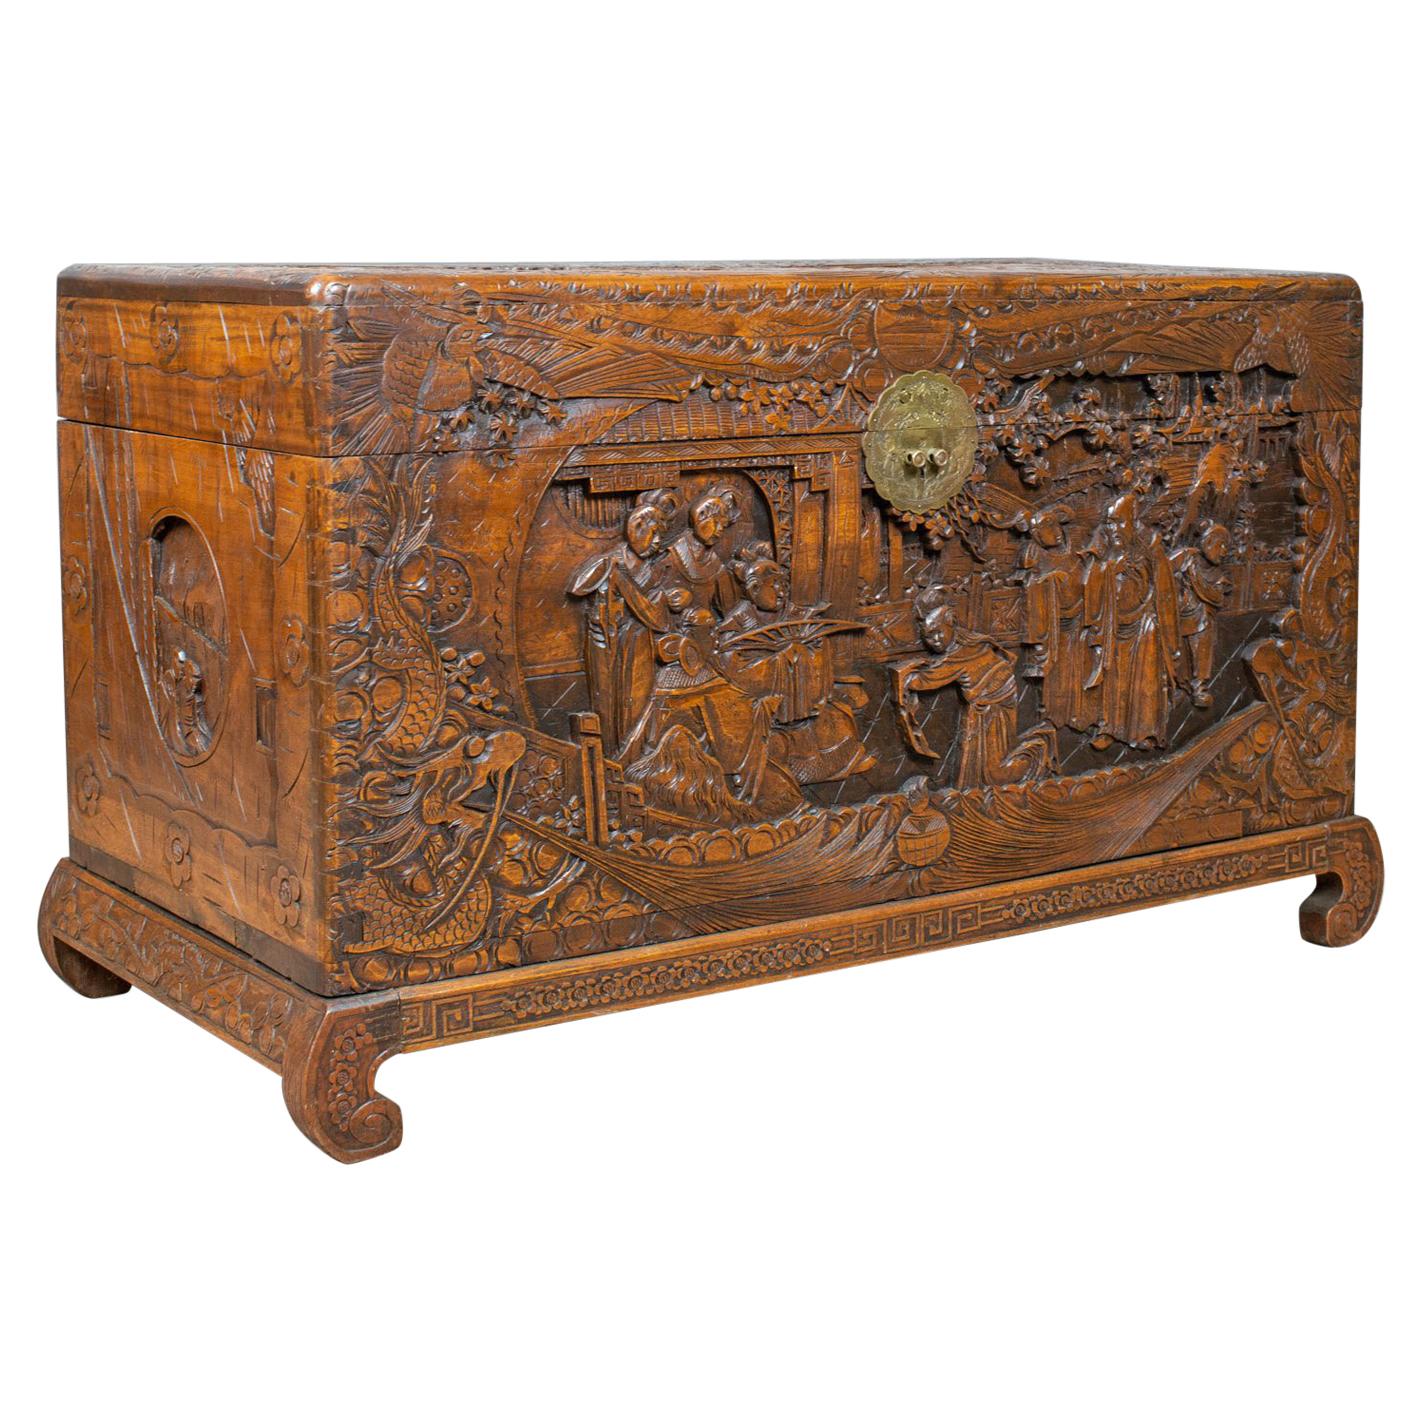 Vintage Camphor Wood Chest, Oriental, Carved, Trunk, circa 1930